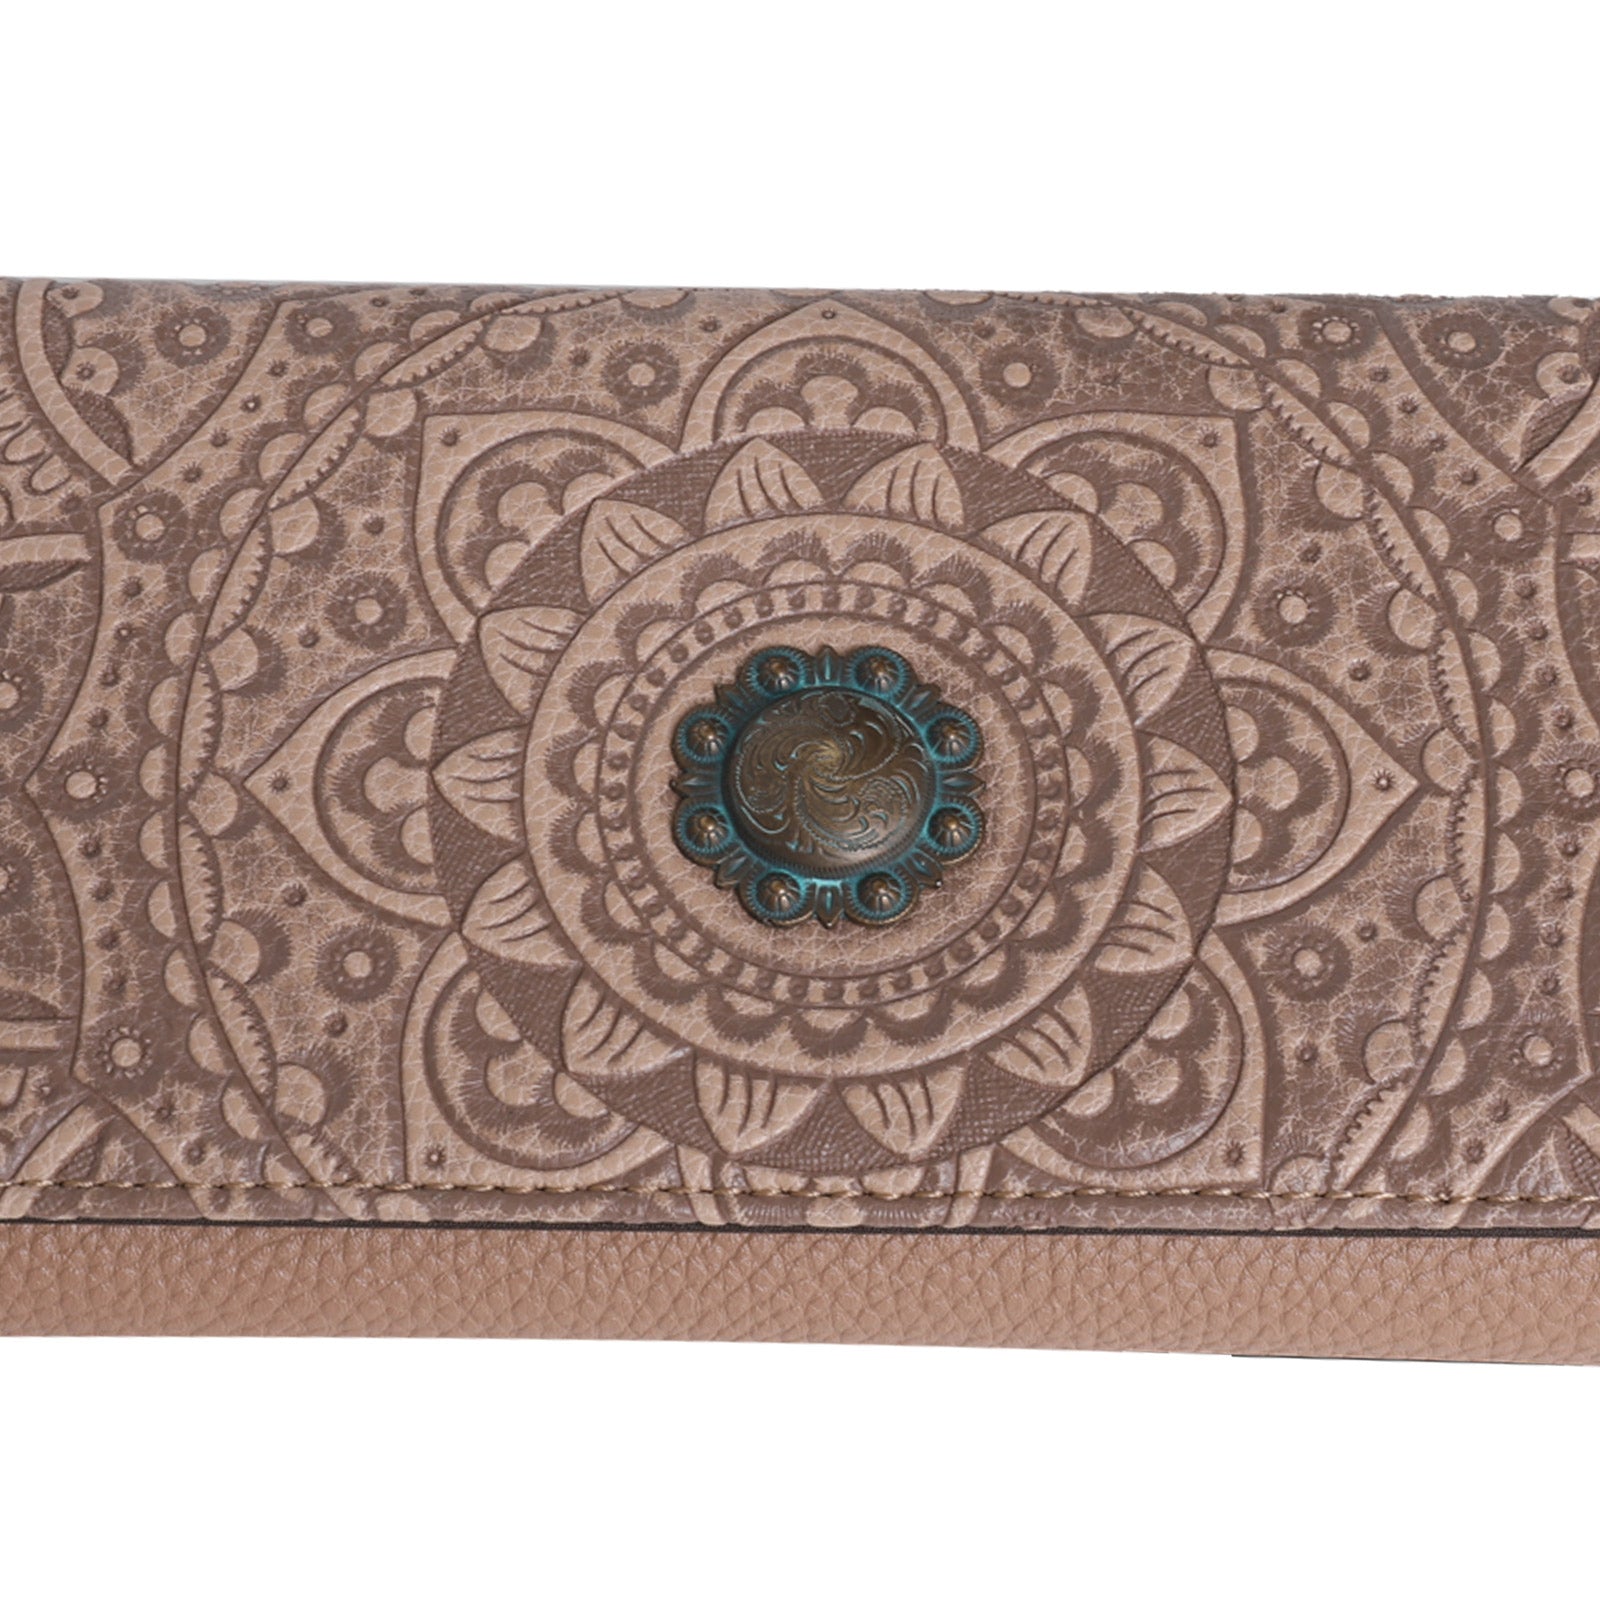 Montana West Western Tooling Collection Wallet - Cowgirl Wear